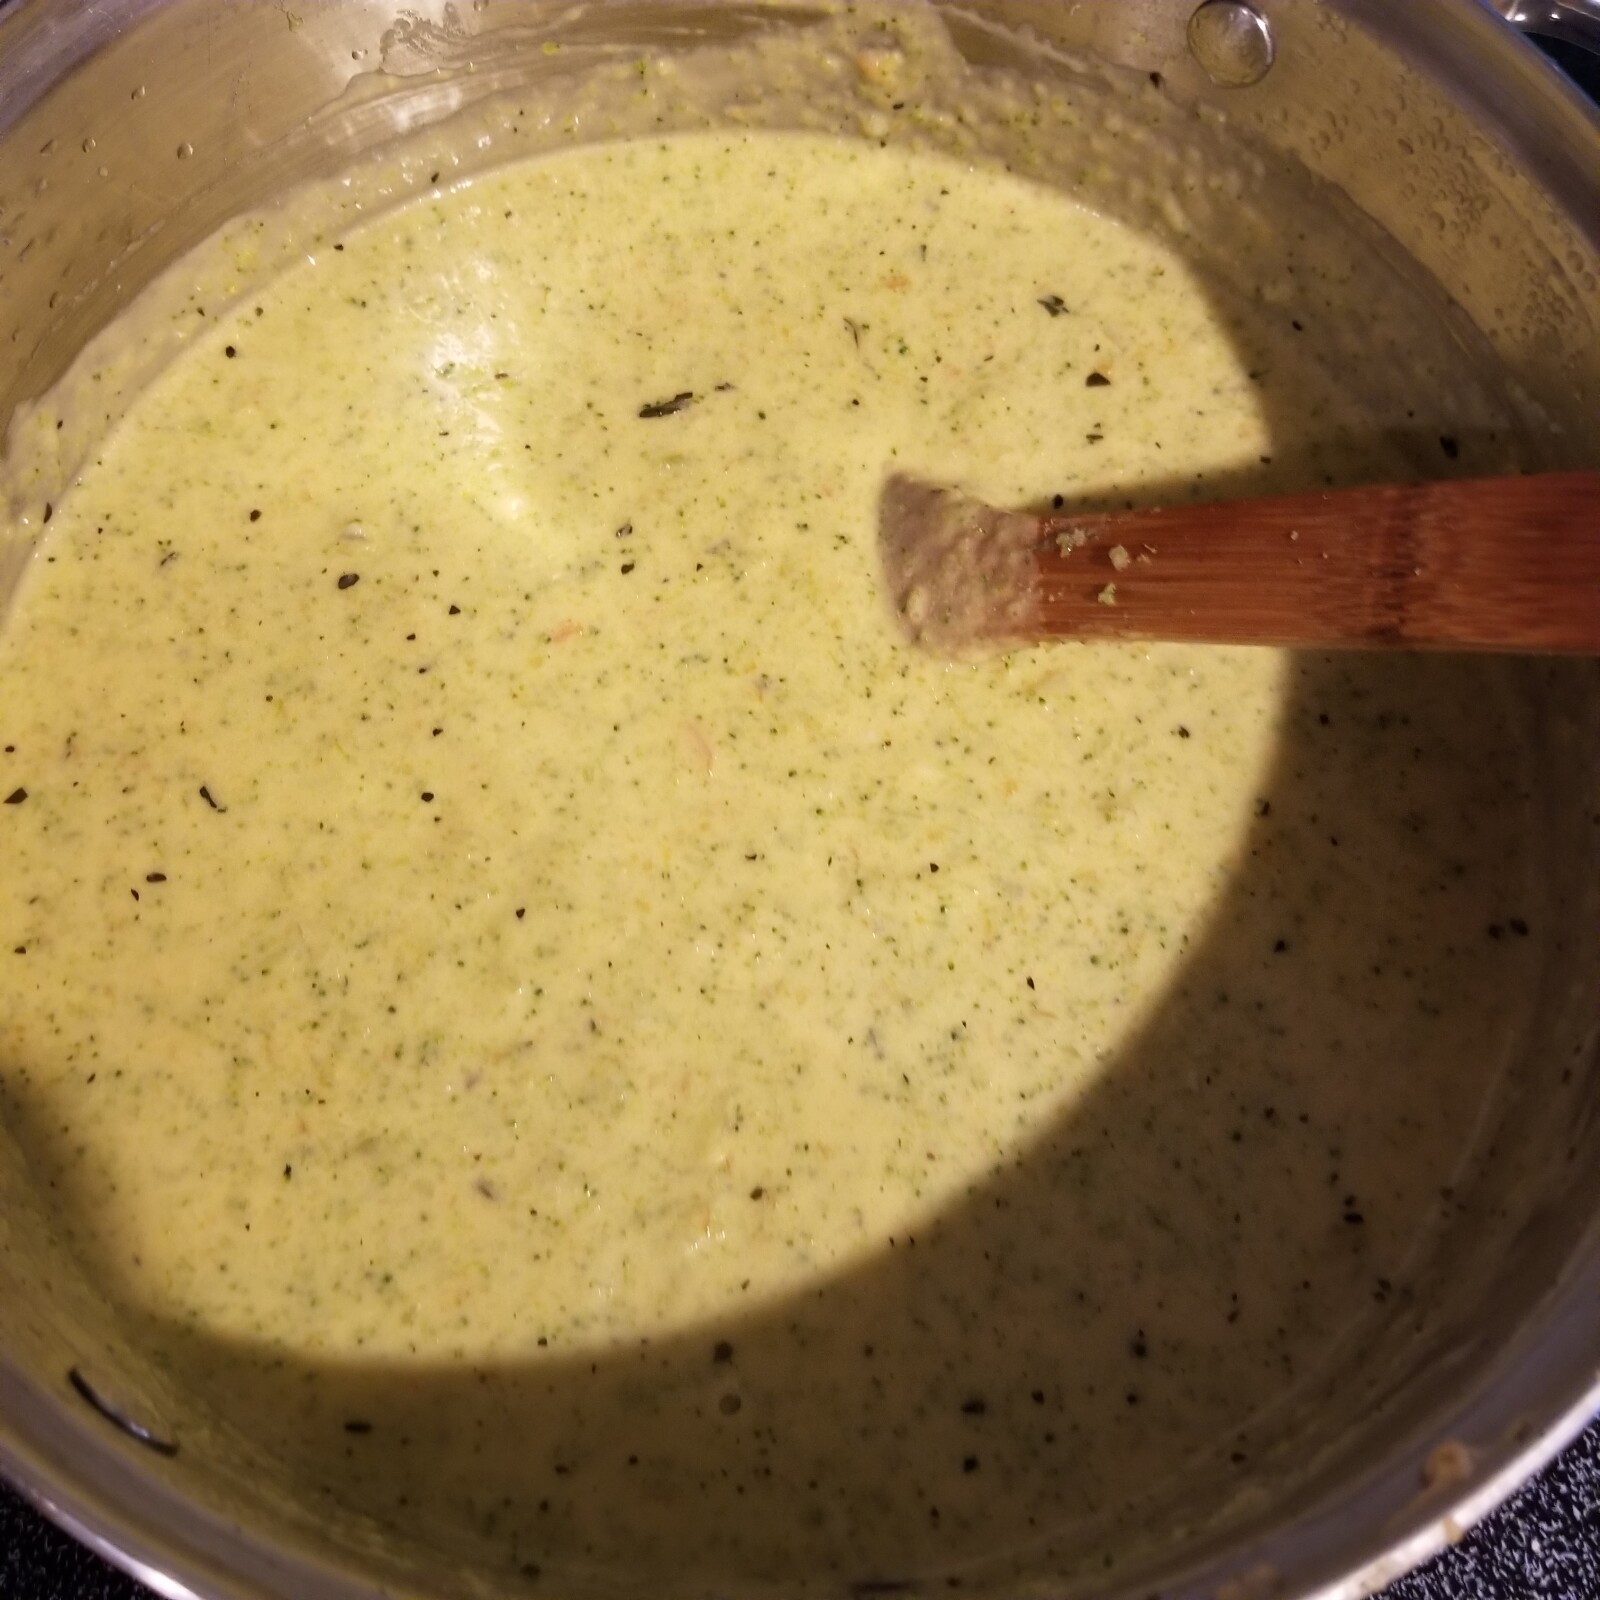 Broccoli and cheese soup.